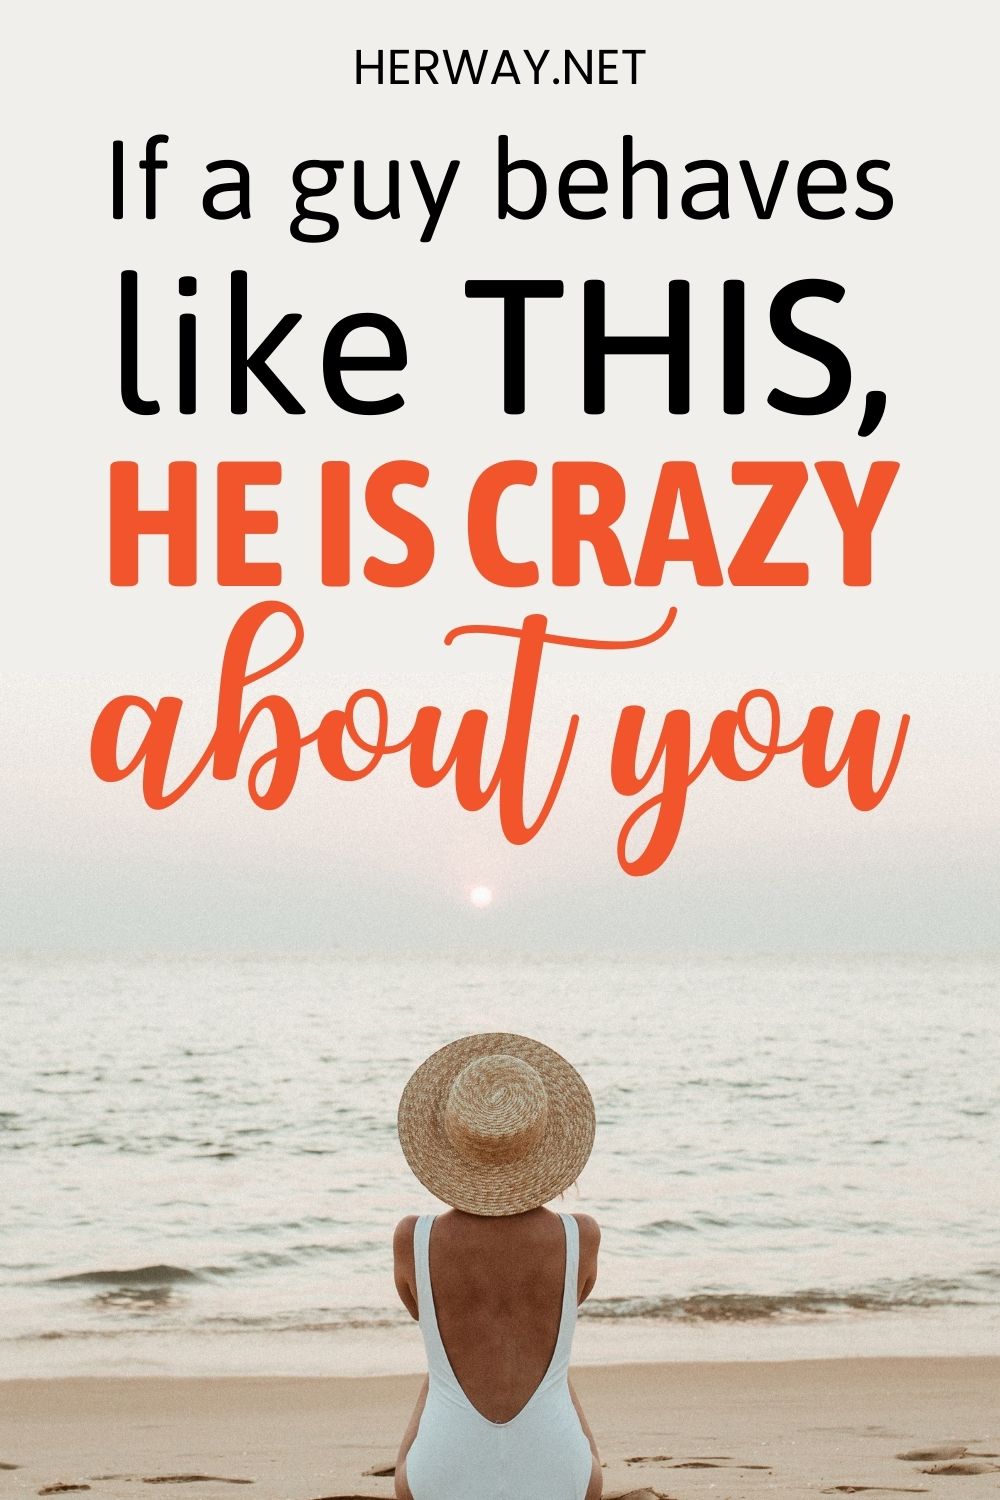 33 Signs He Finds You Irresistible An Insight Into His Mind Pinterest